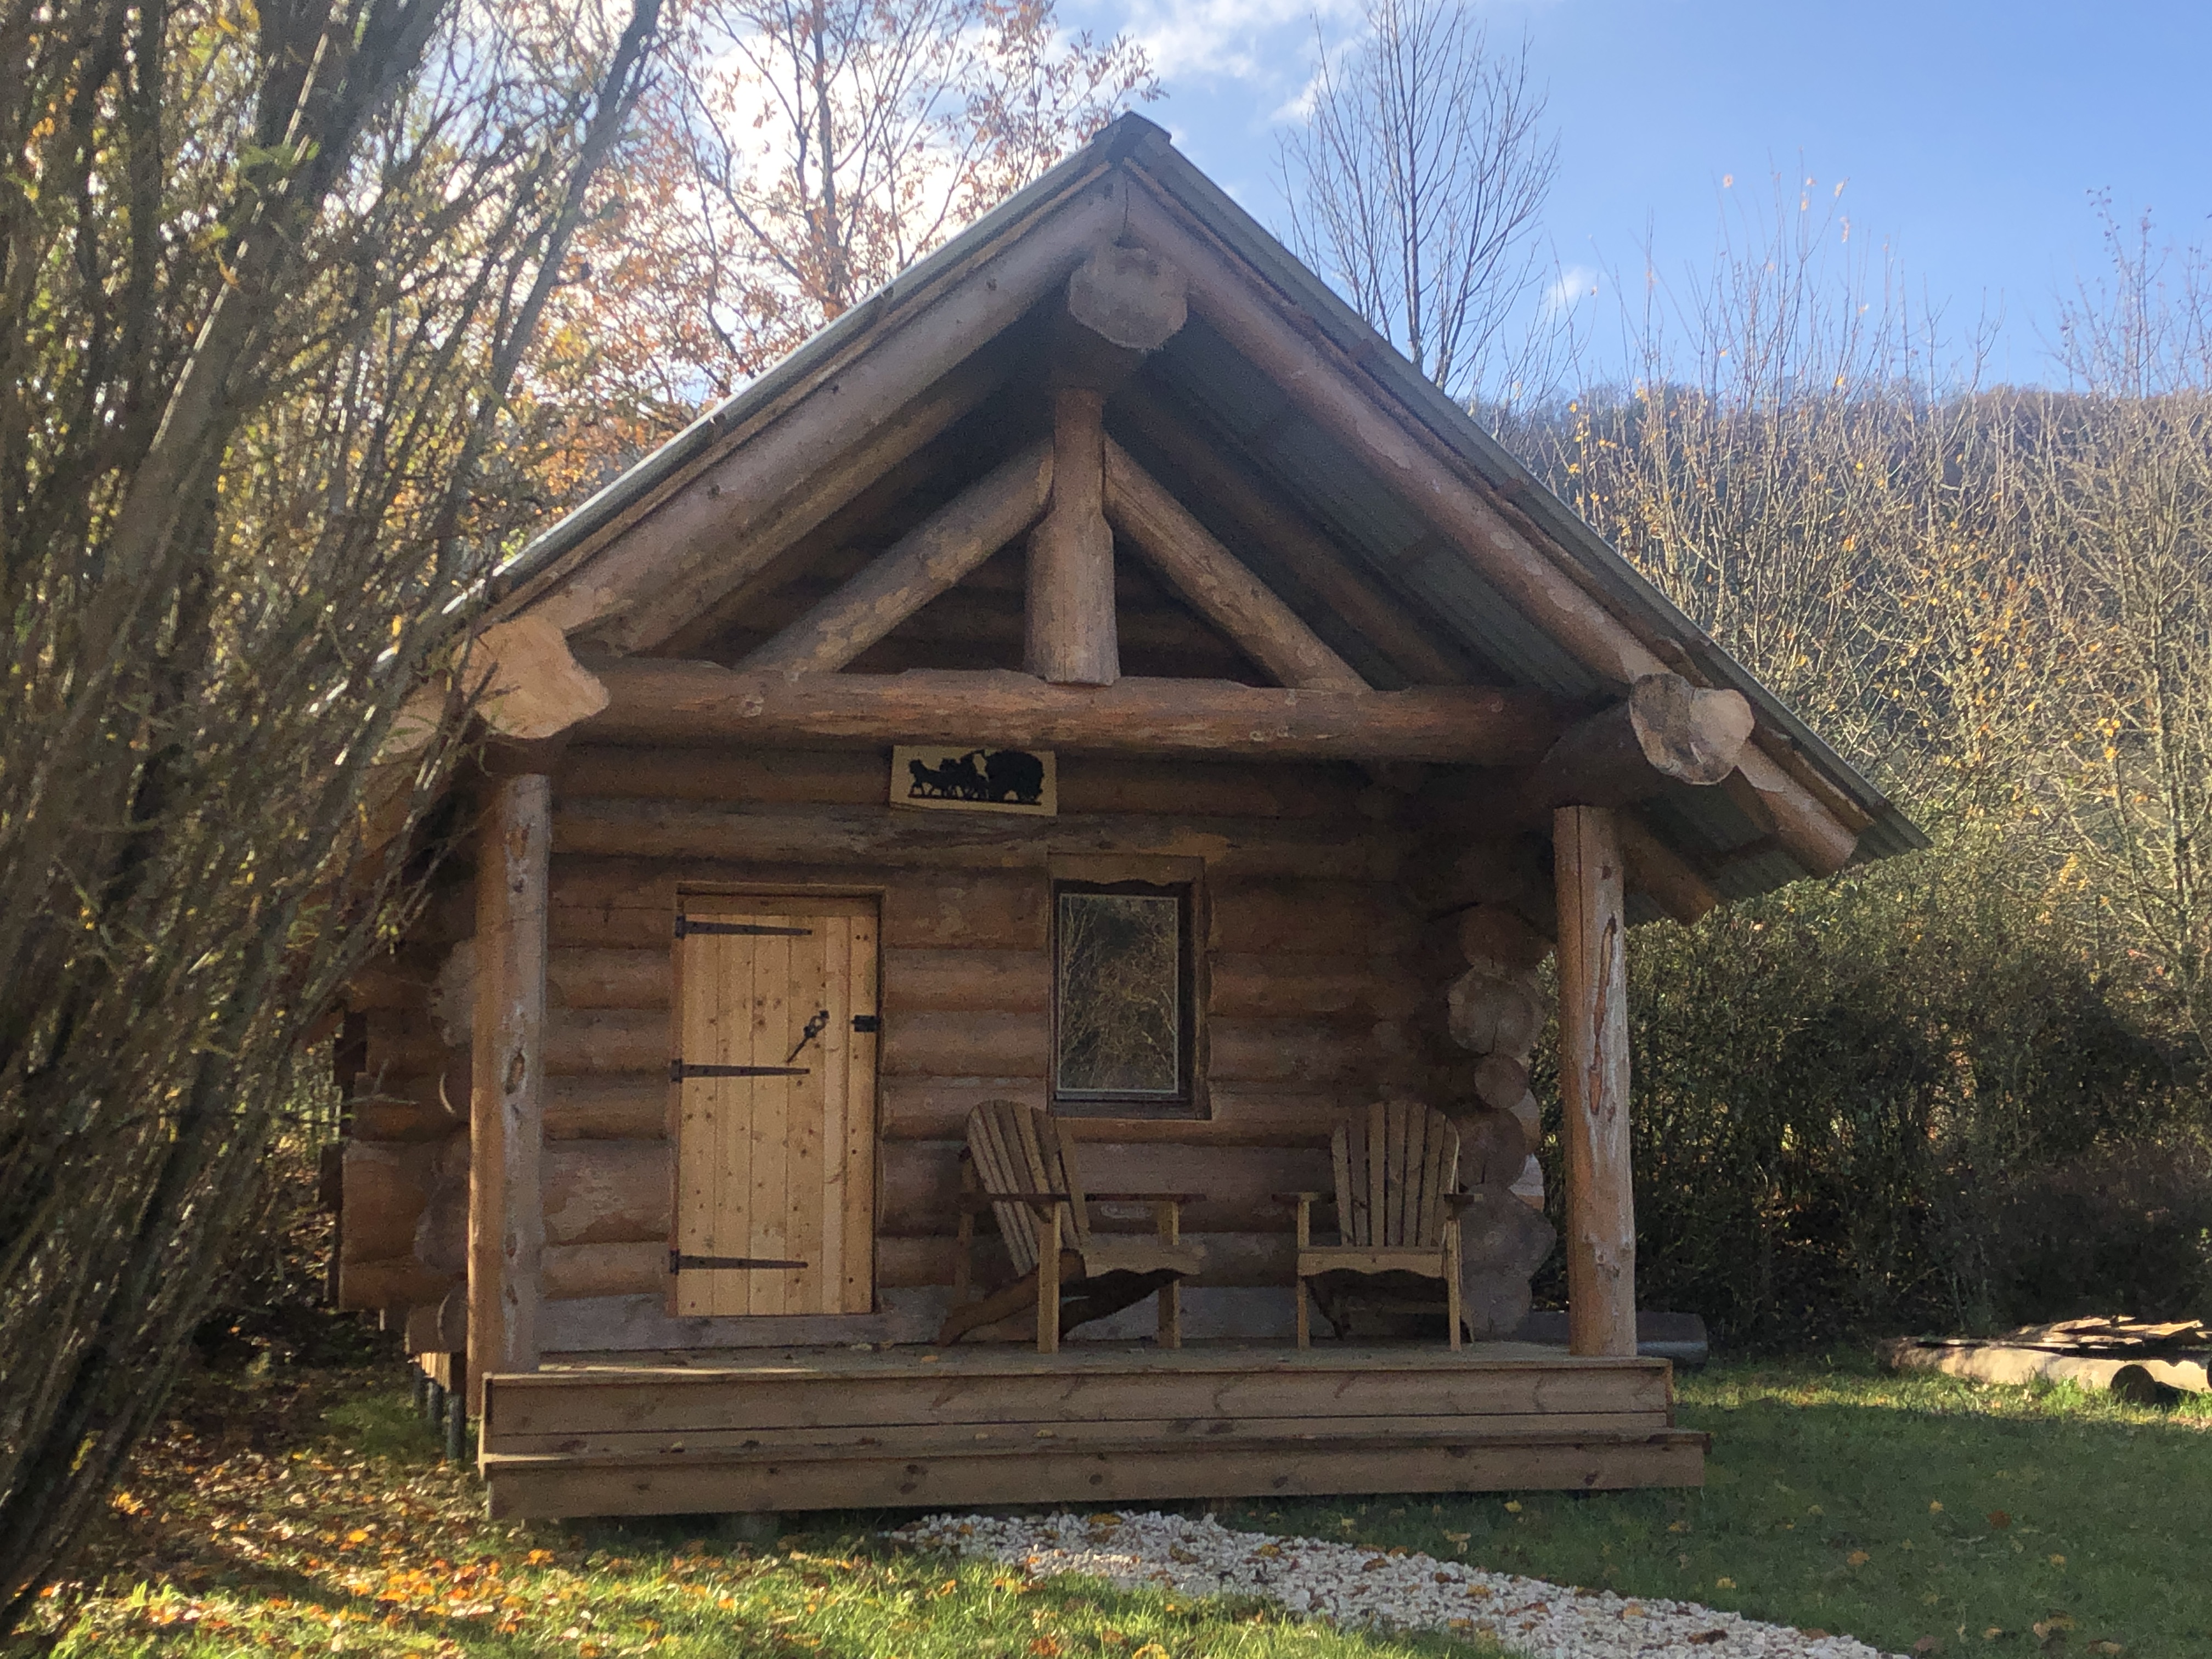 Alloggio - Valdône Cottage - 24M2- 2 Bedrooms, In Real Wooden Logs - Camping Ecologique LA ROCHE D'ULLY